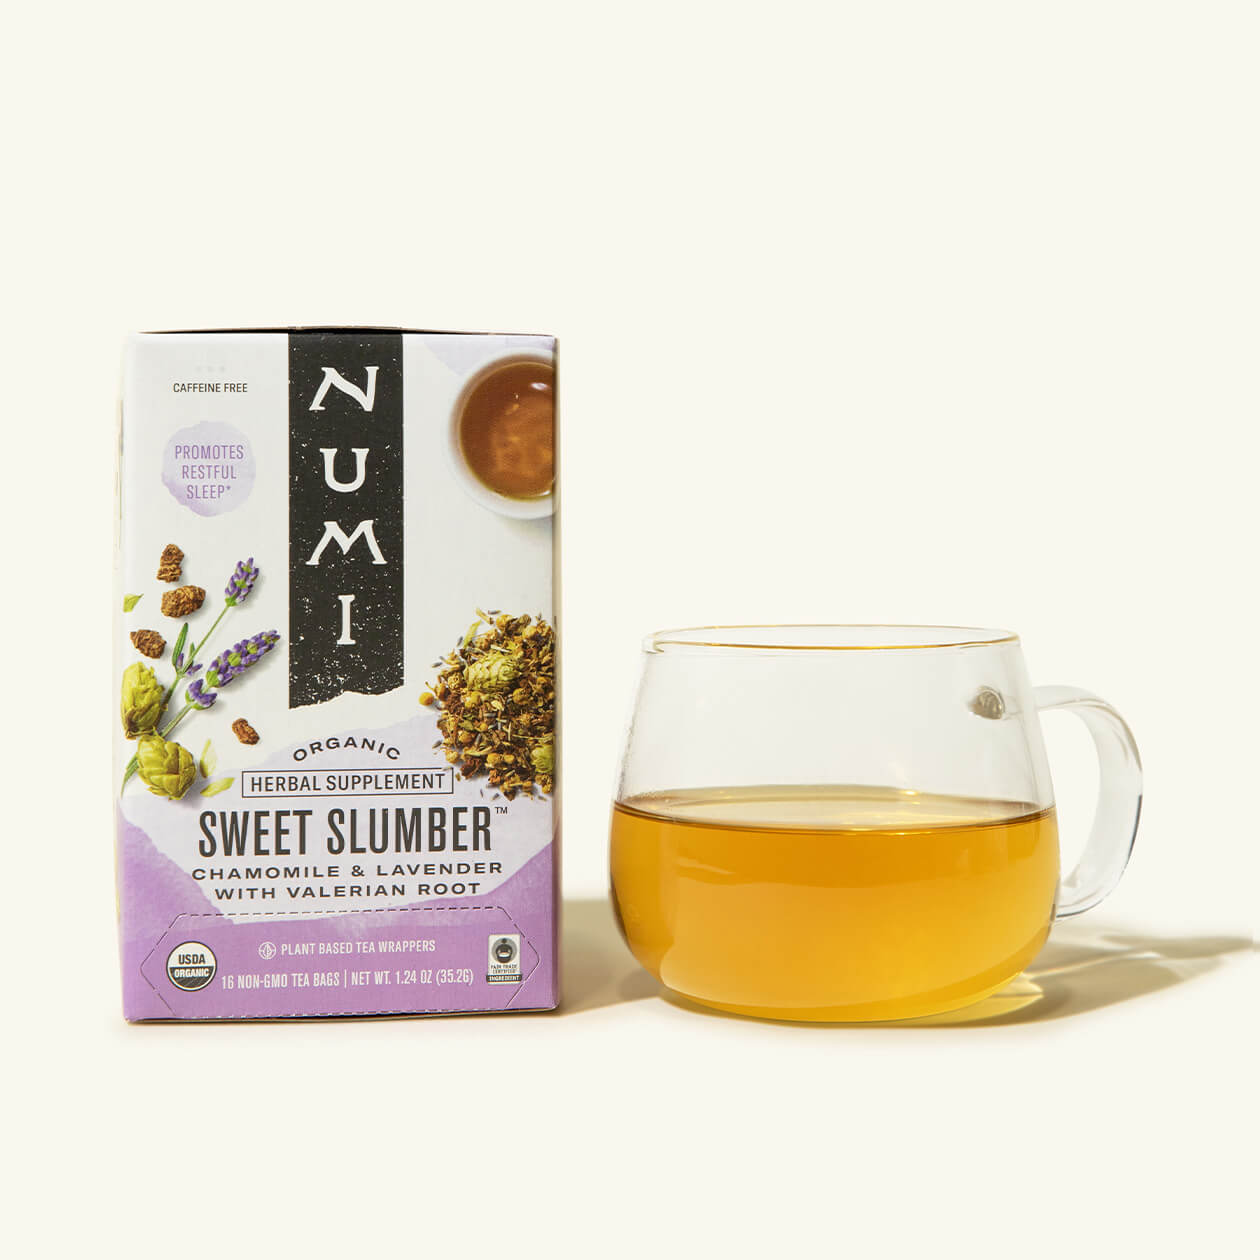 A box of Numi's Sweet Slumber tea next to a brewed cup of tea in a clear cup